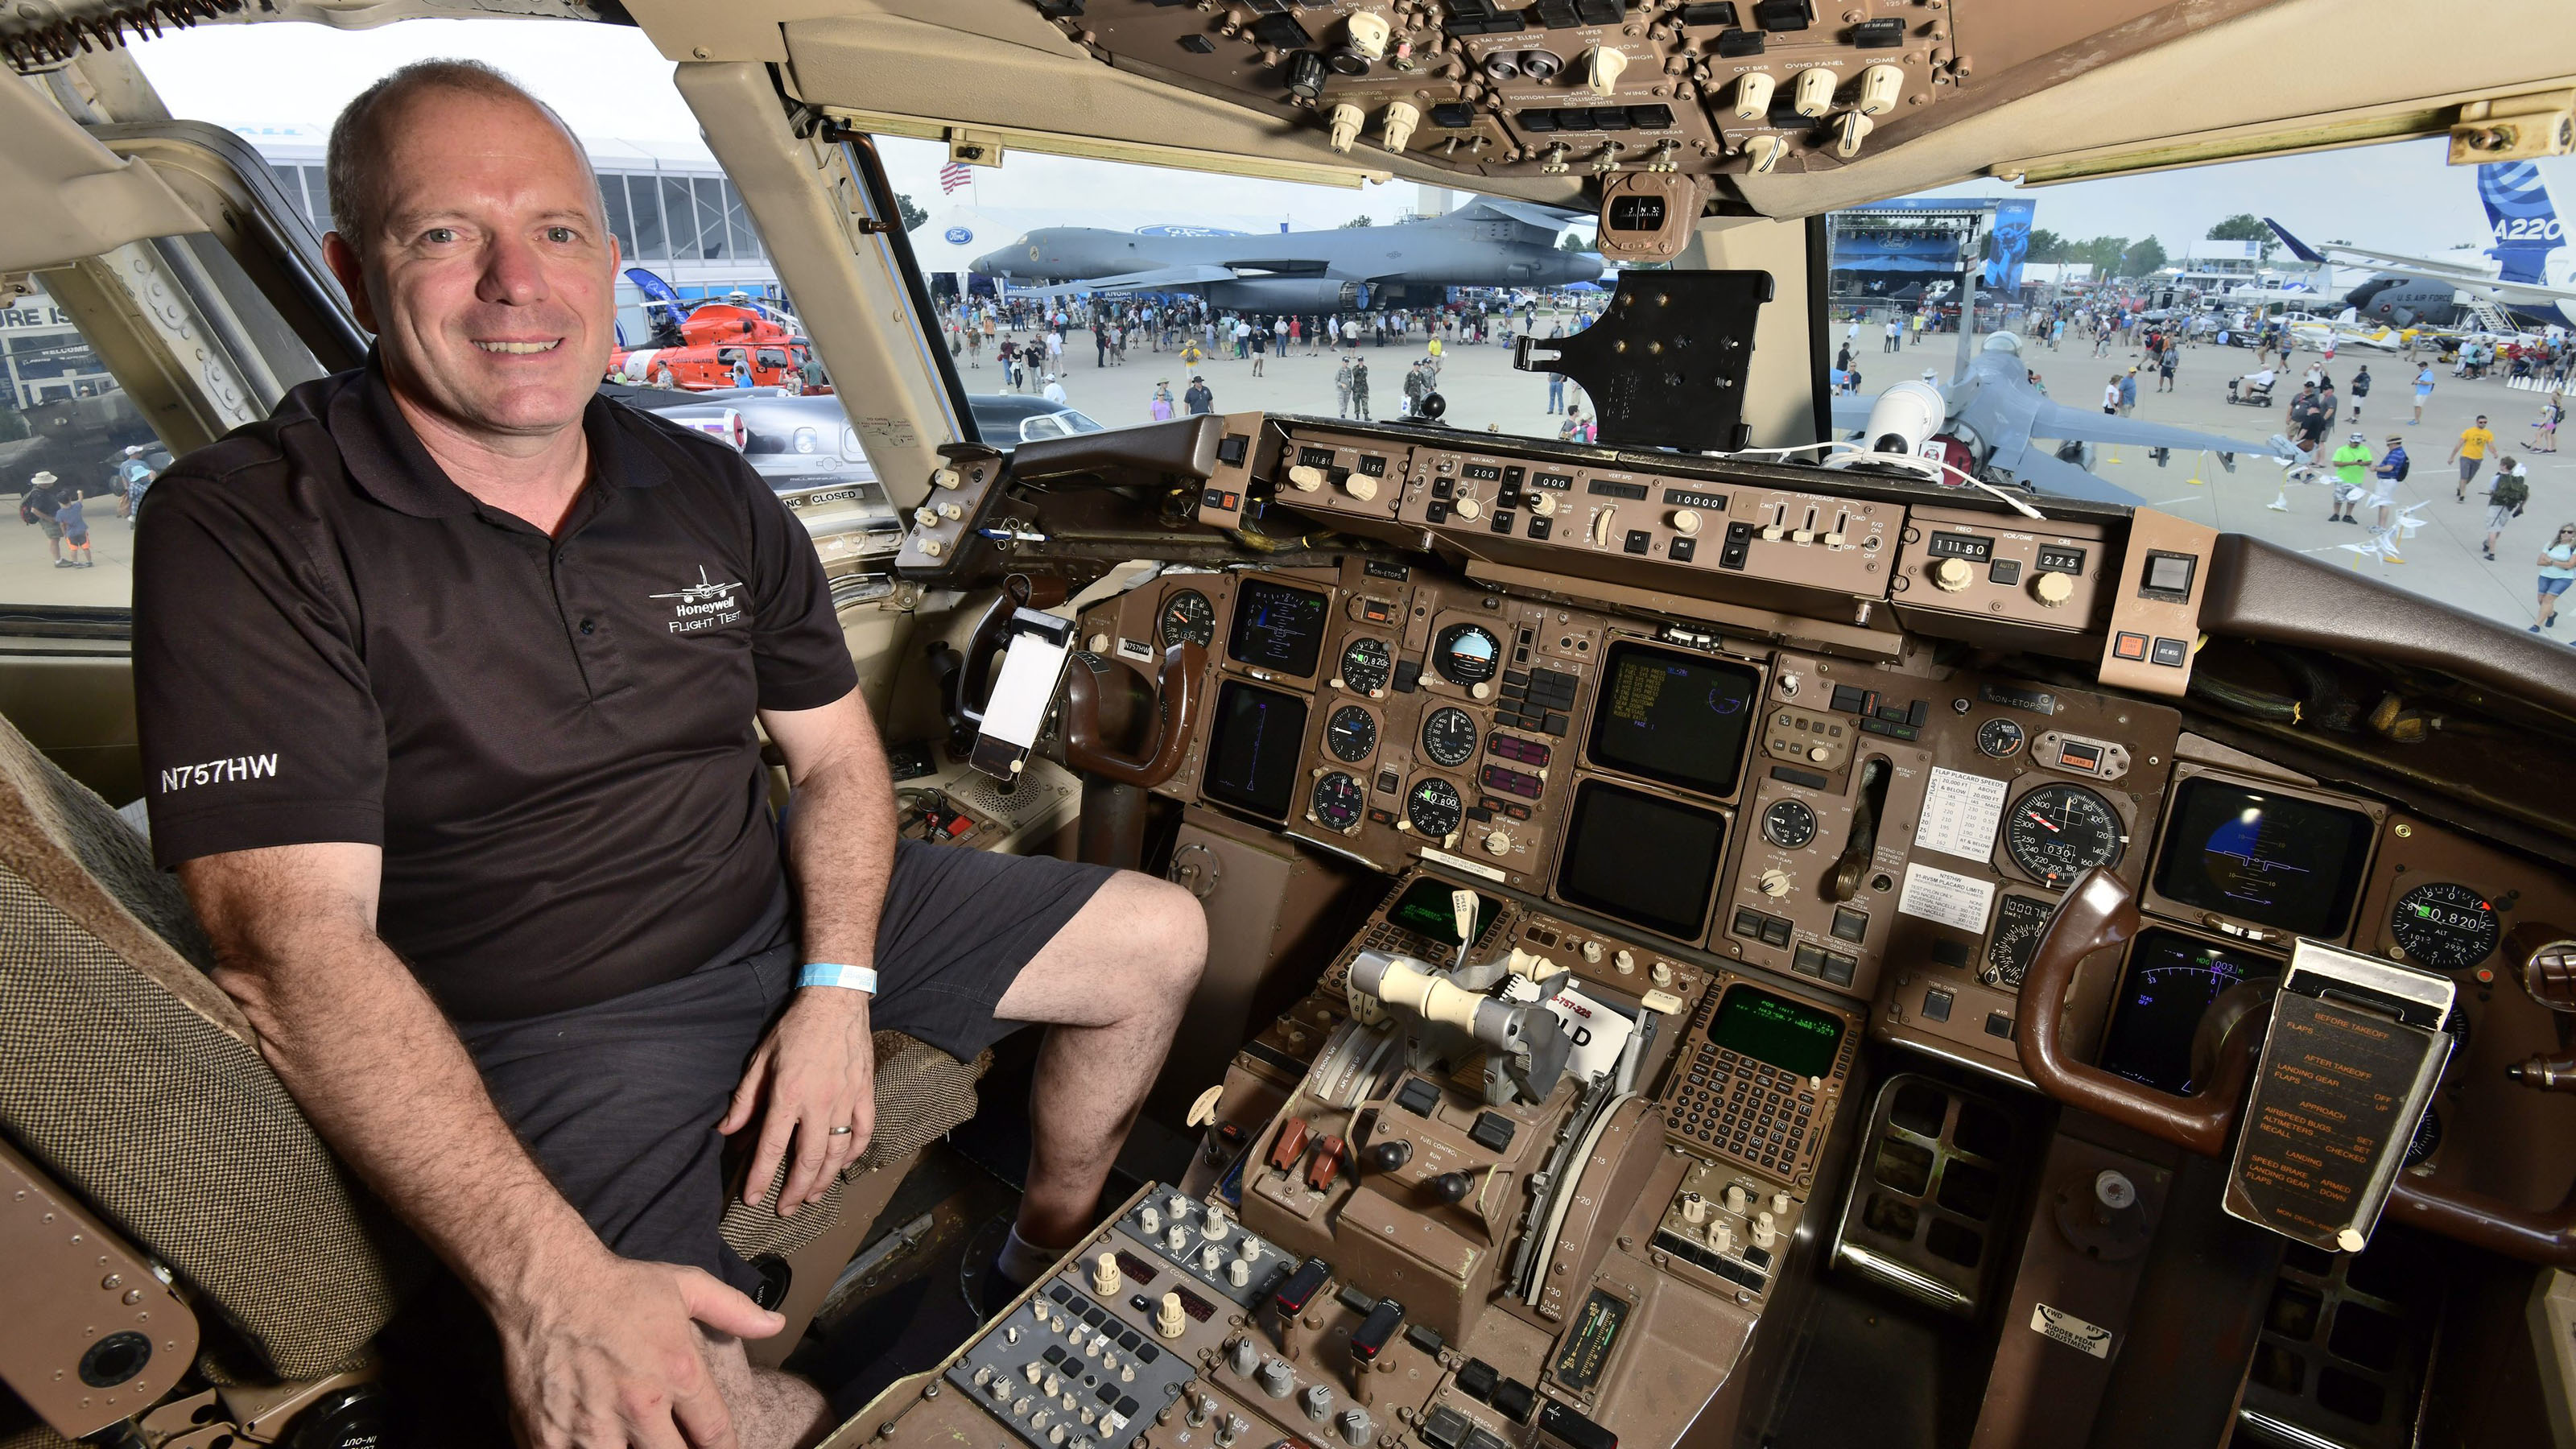 Joe Duval, Honeywell's chief test pilot—and his largest charge, the company's Boeing 757—both made their first visits to EAA AirVenture during 2018. Photo by Mike Collins.